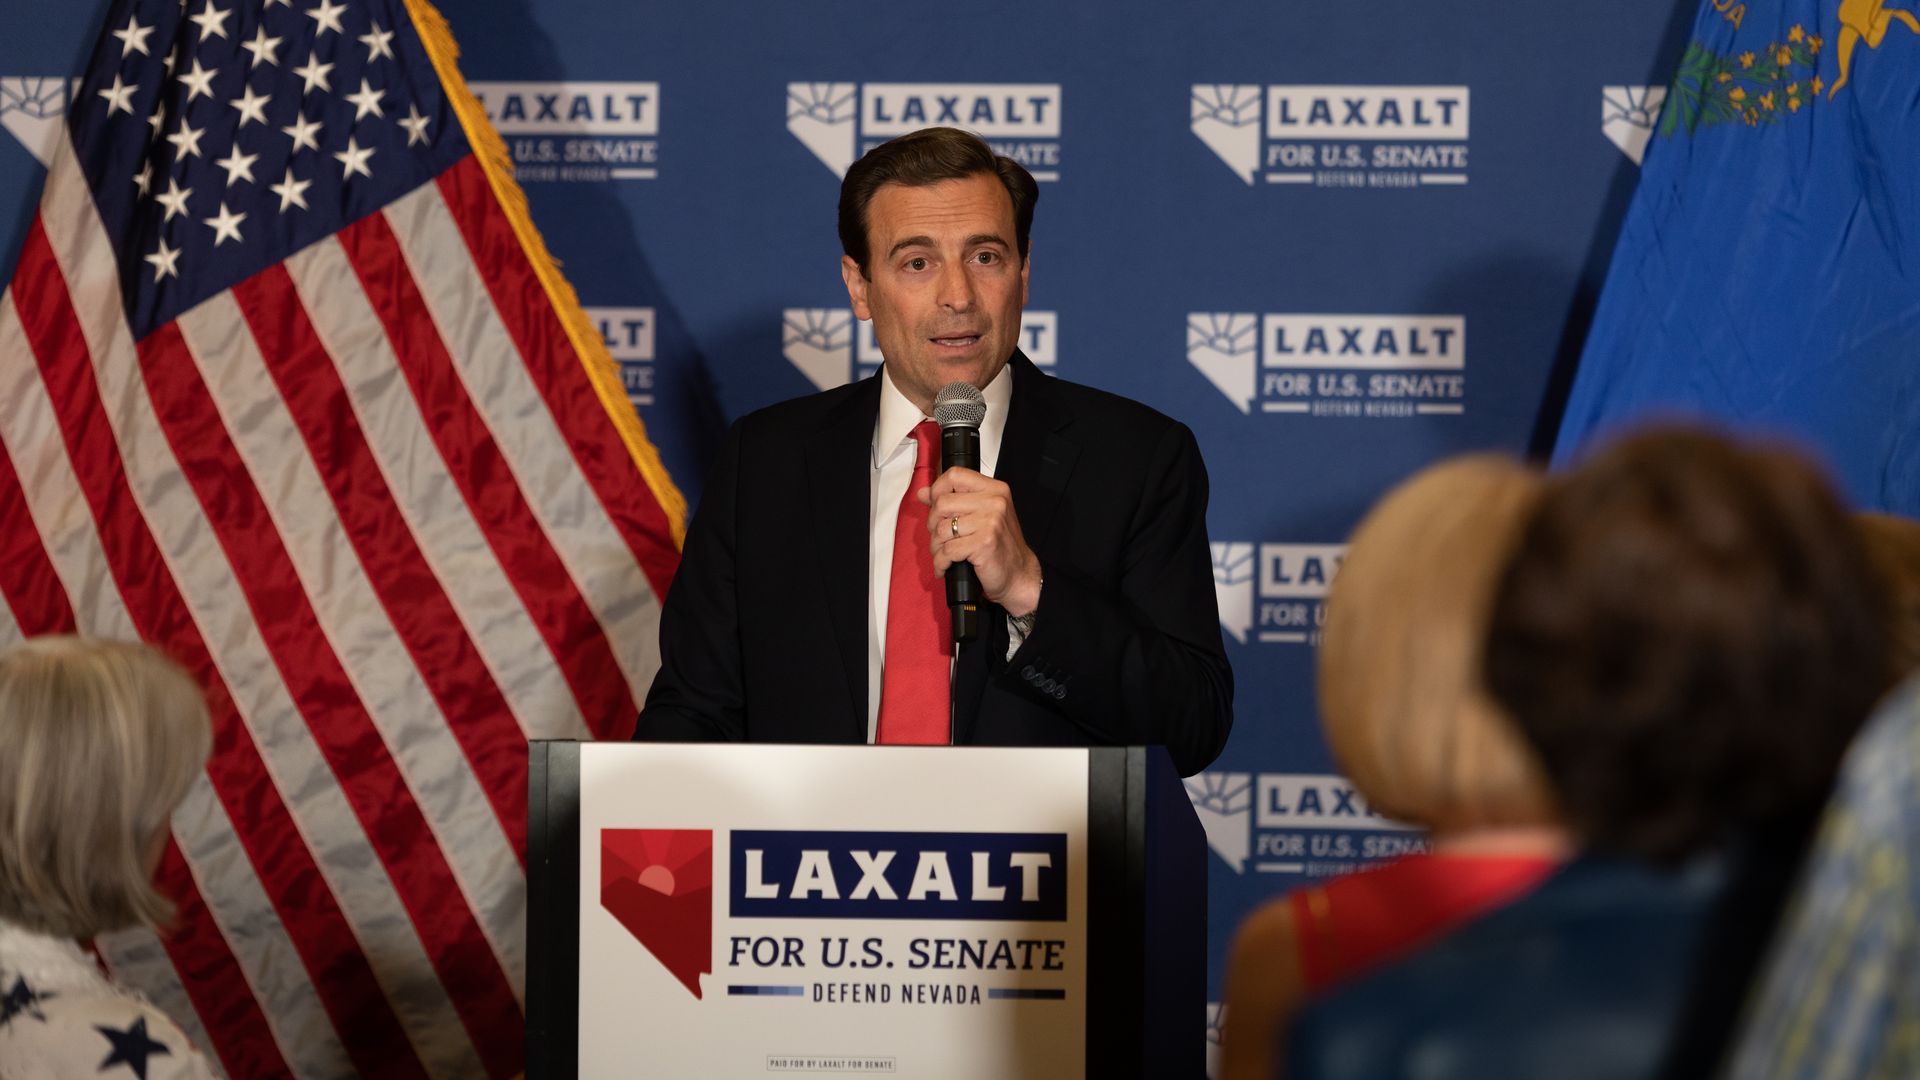 Republican candidate for U.S. Senate Adam Laxalt speaks to a crowd at an election night event on June 14, 2022 in Reno, Nevada.